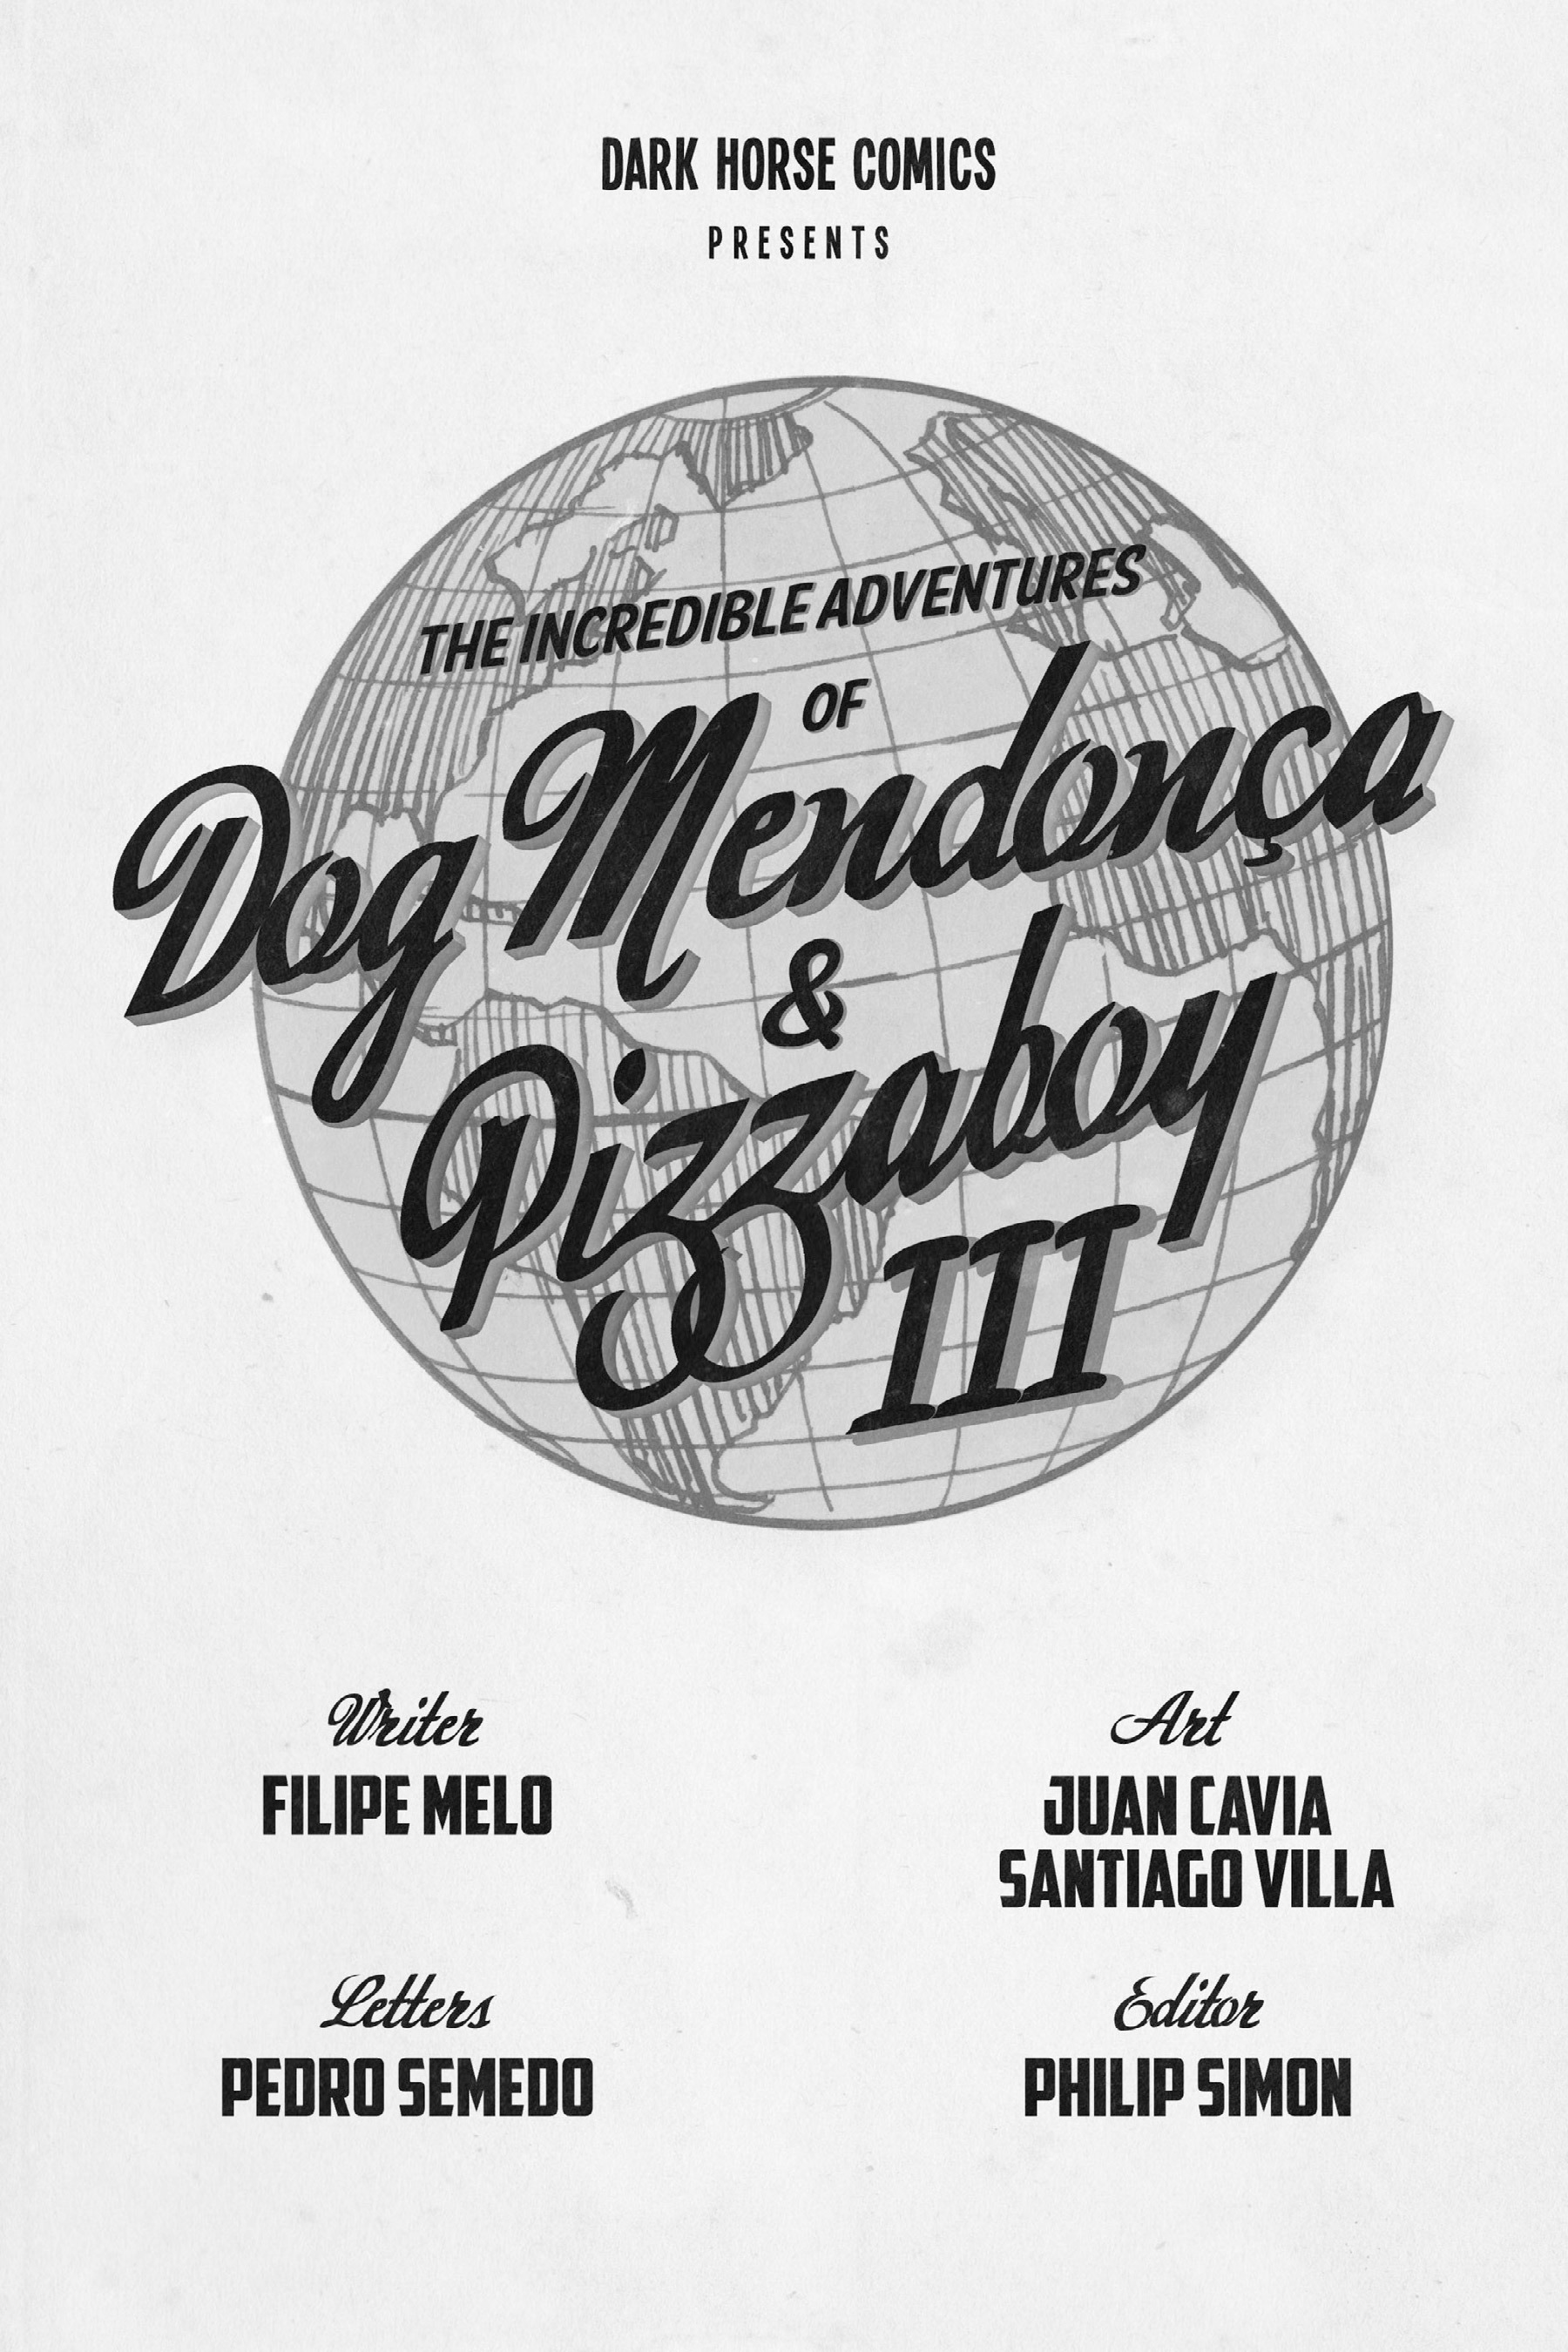 Read online The Incredible Adventures of Dog Mendonca and Pizzaboy comic -  Issue # TPB 3 - 10